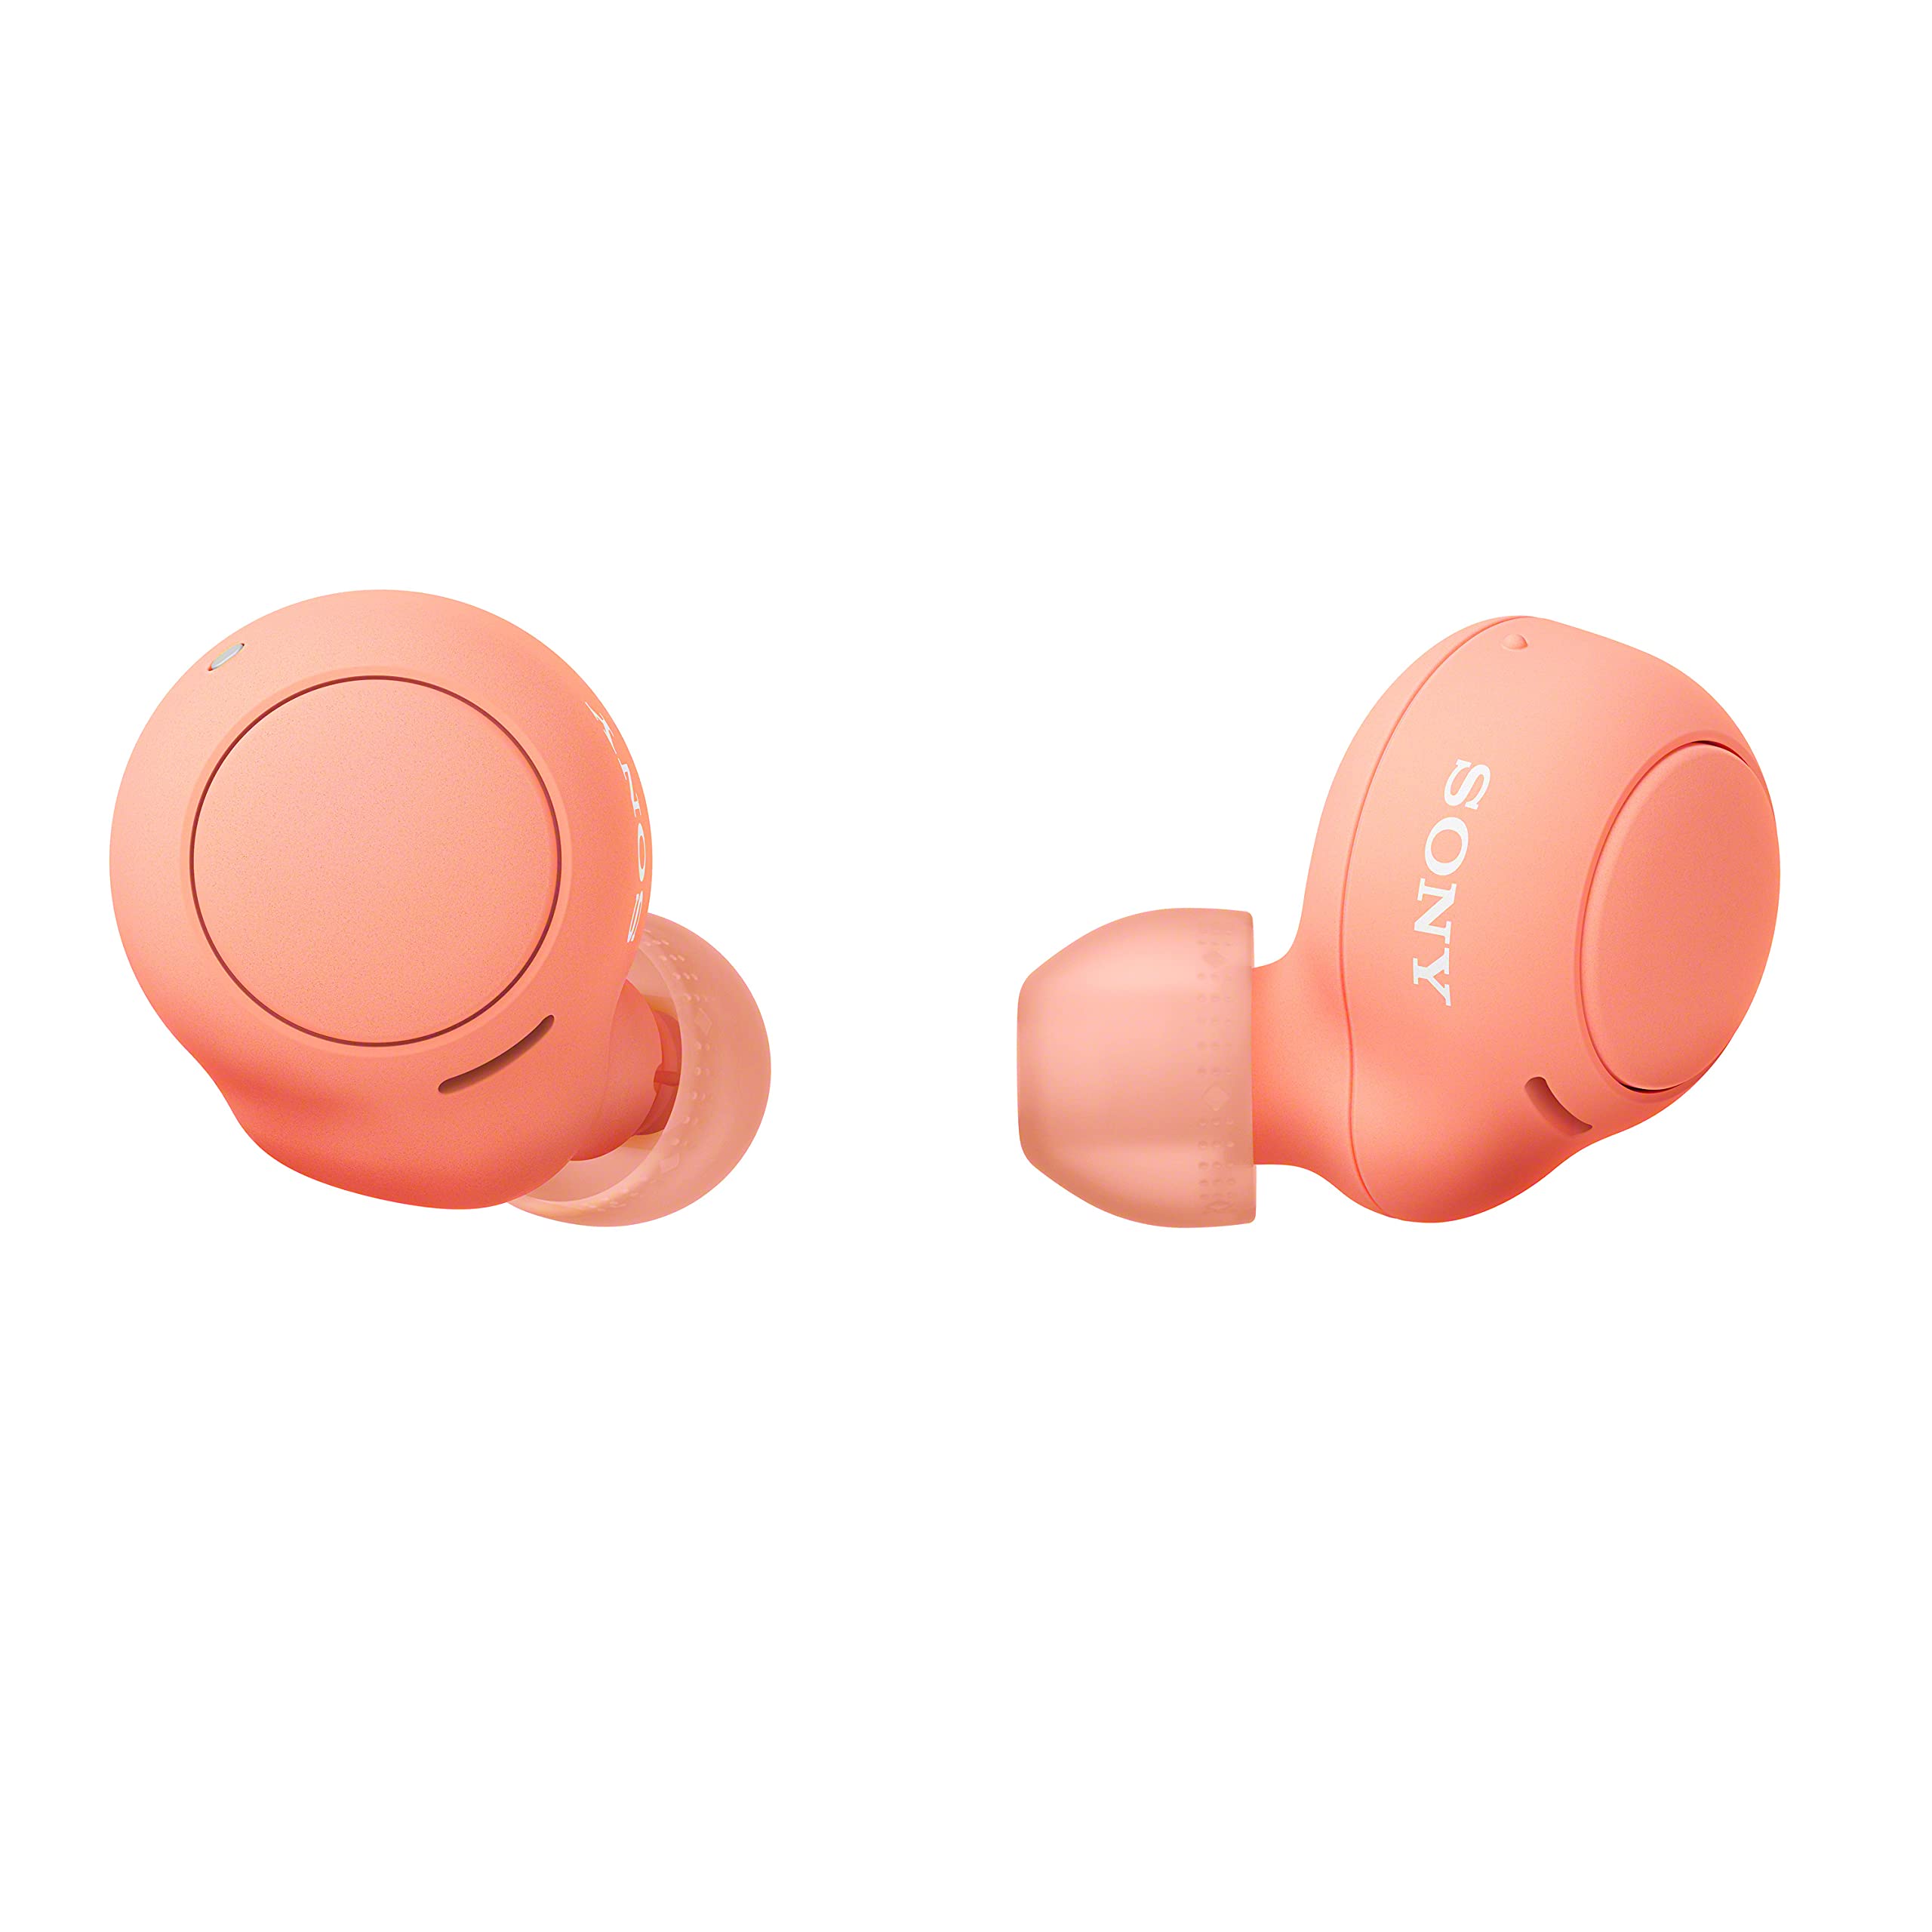 Sony WF-C500 True Wireless Headphones - Up to 20 hours battery life with charging case - Voice Assistant compatible - Built-in mic for phone calls - Reliable Bluetooth® connection - Orange